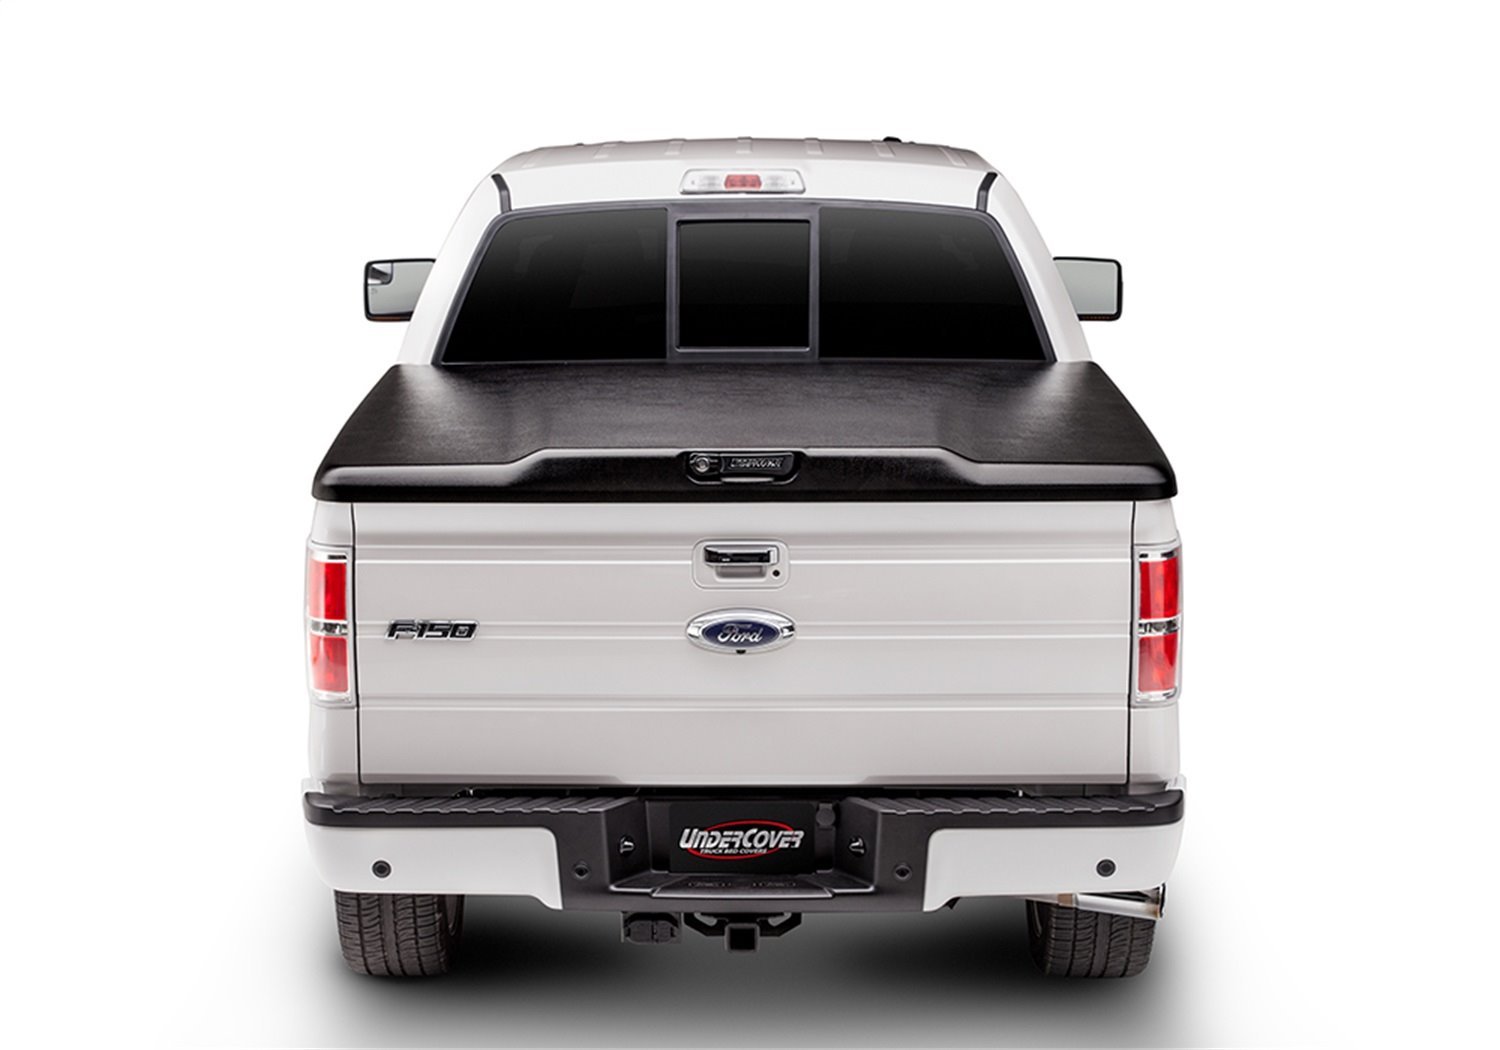 UC1178 Elite Hard Non-Folding Cover, Fits Select Chevy Silverado 5'9" Bed EXT/Crew w/o Multi-Tailgate, Black Textured